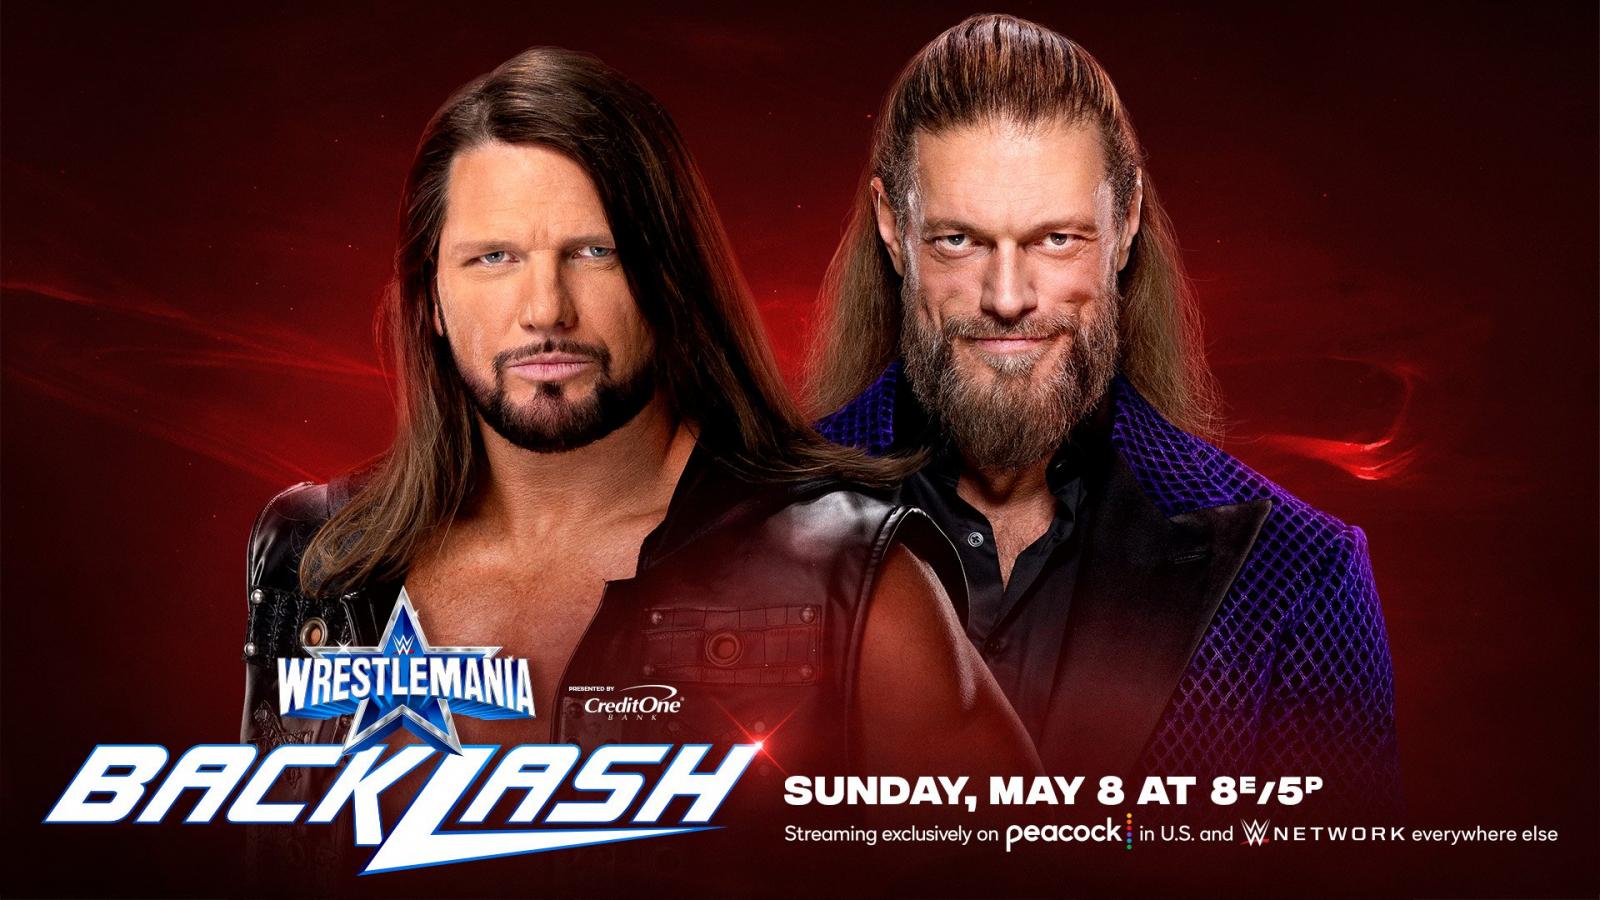 WWE WrestleMania Backlash start time and where to watch